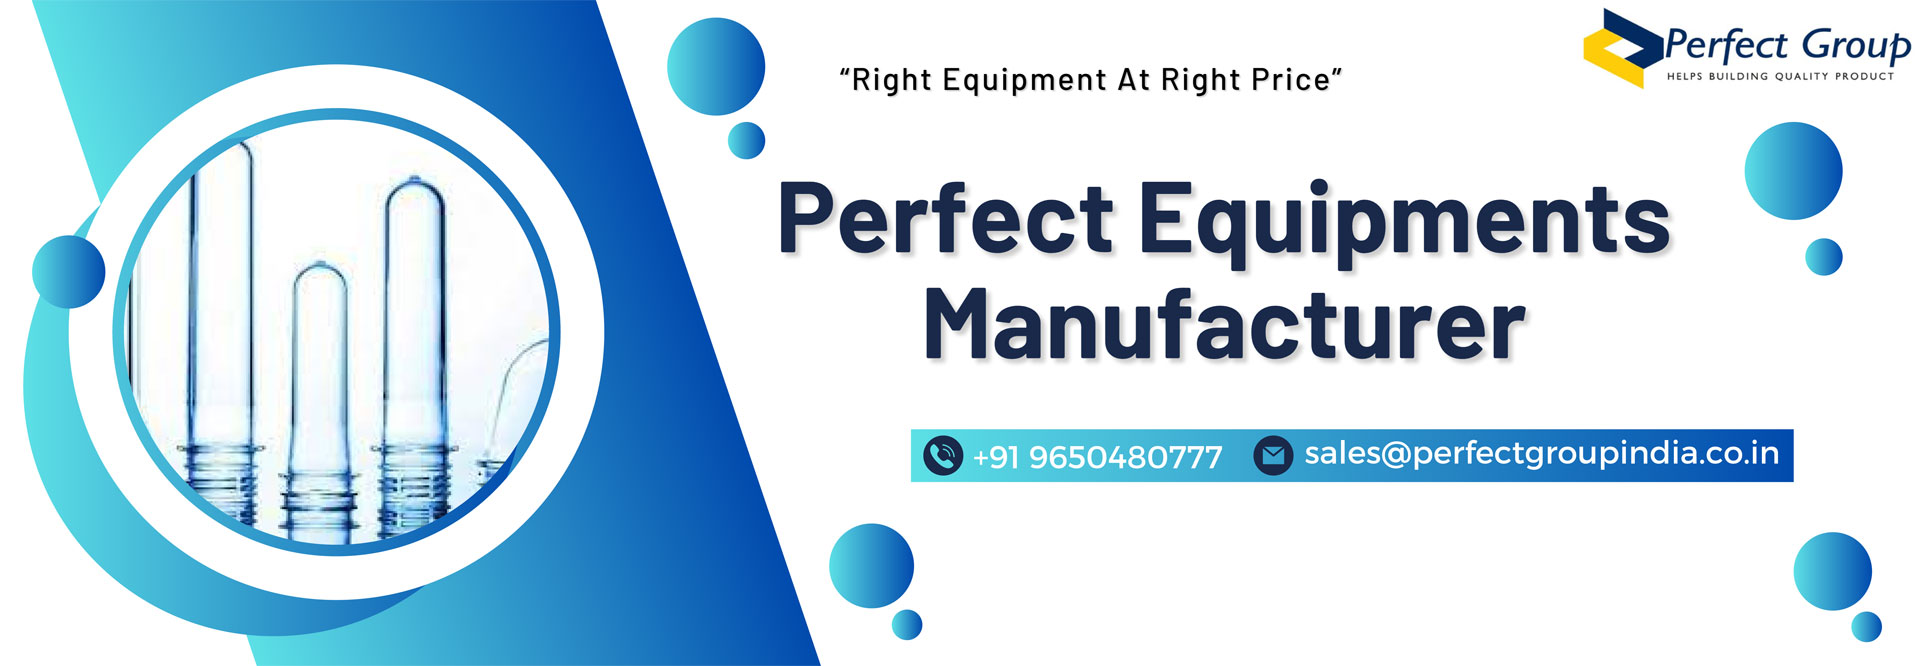 Perfect Equipments Manufacturer